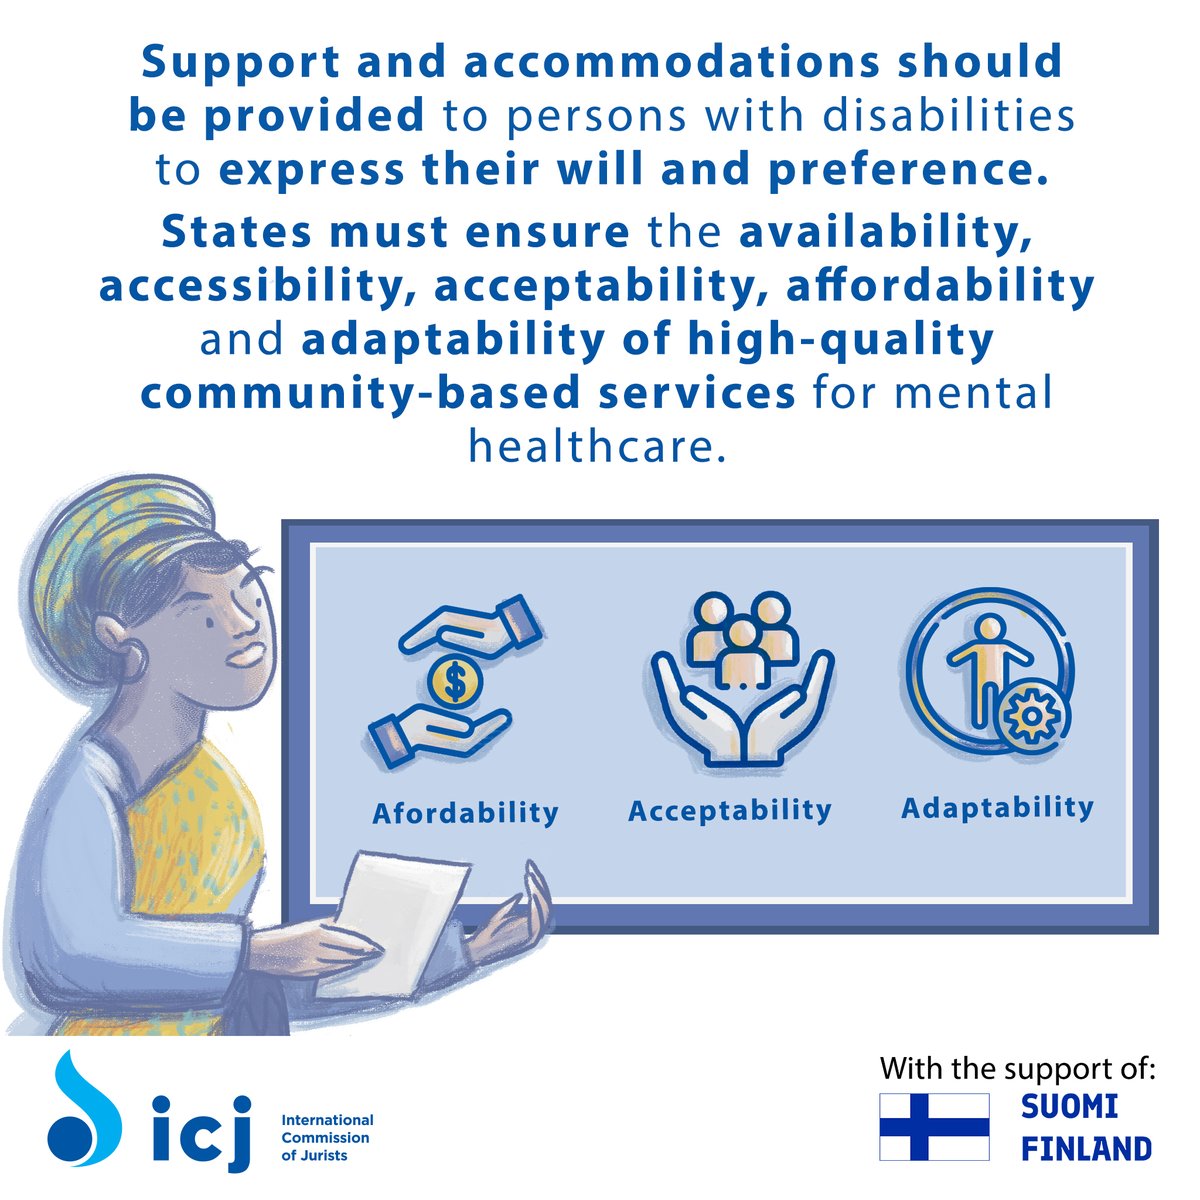 2/2 #MentalHealth support services provided by States must align with #deinstitutionalization processes. 📄See the #DIguidelines which offer further guidance on these obligations: ohchr.org/en/documents/l… #WorldHealthDay #disabilityrights #MentalHealthMatters